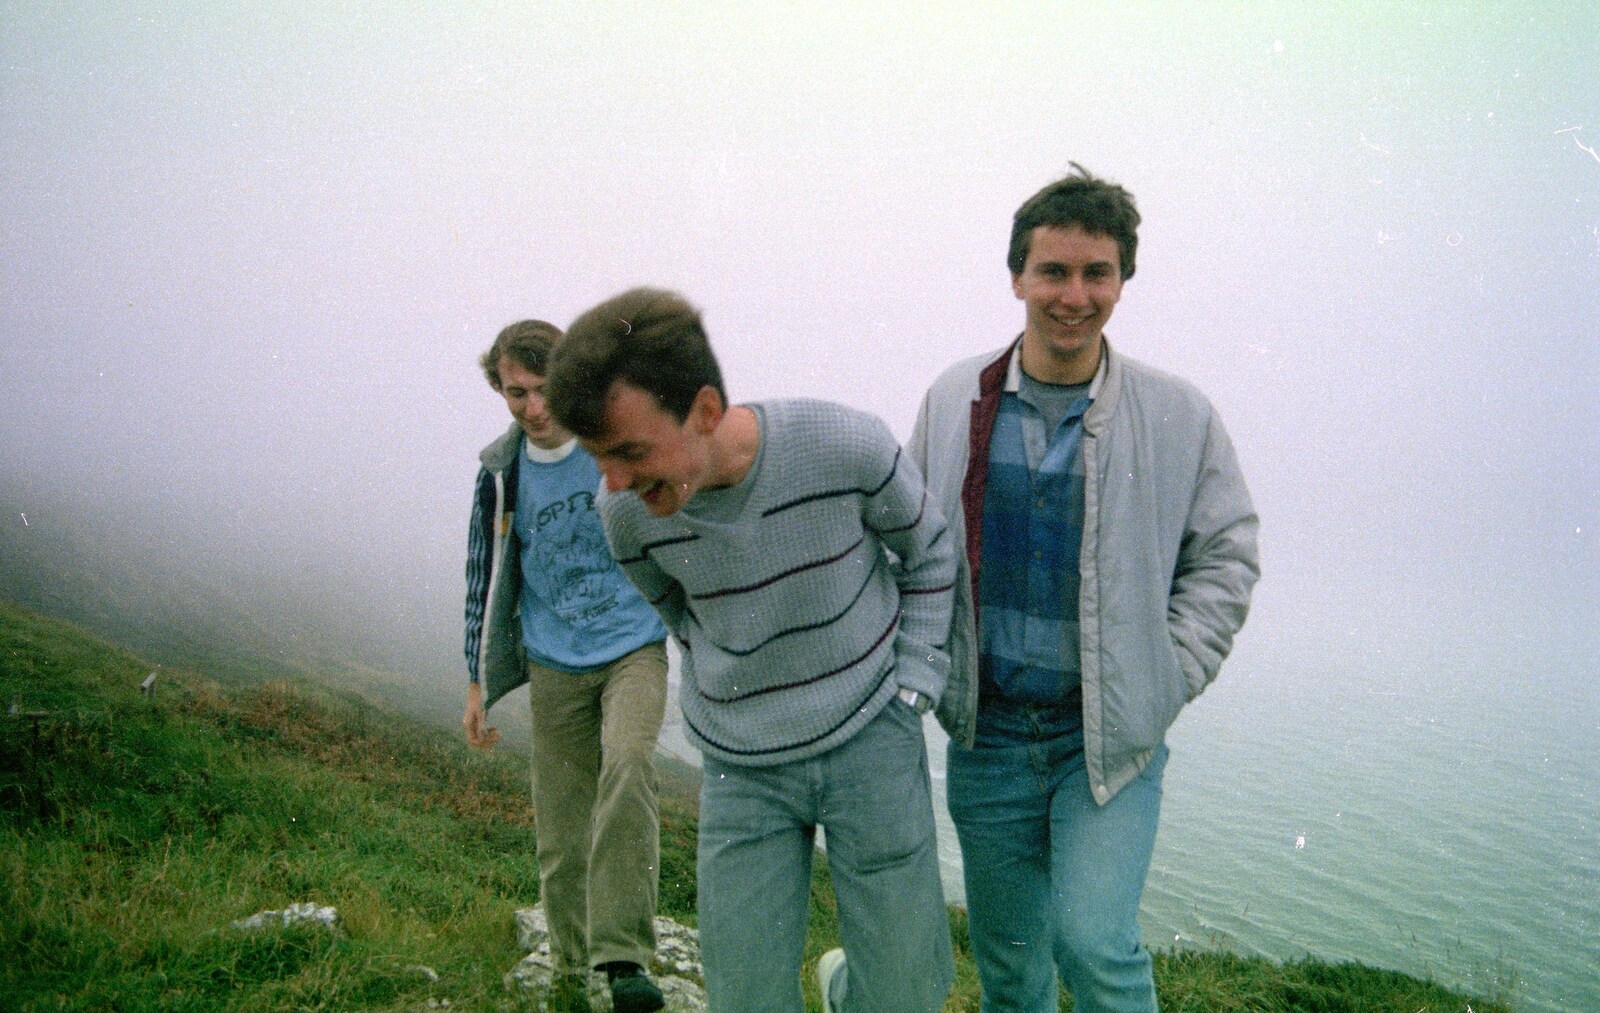 The lads on the cliff top from A Trip to Trotsky's Mount, Dartmoor, Devon - 20th March 1987